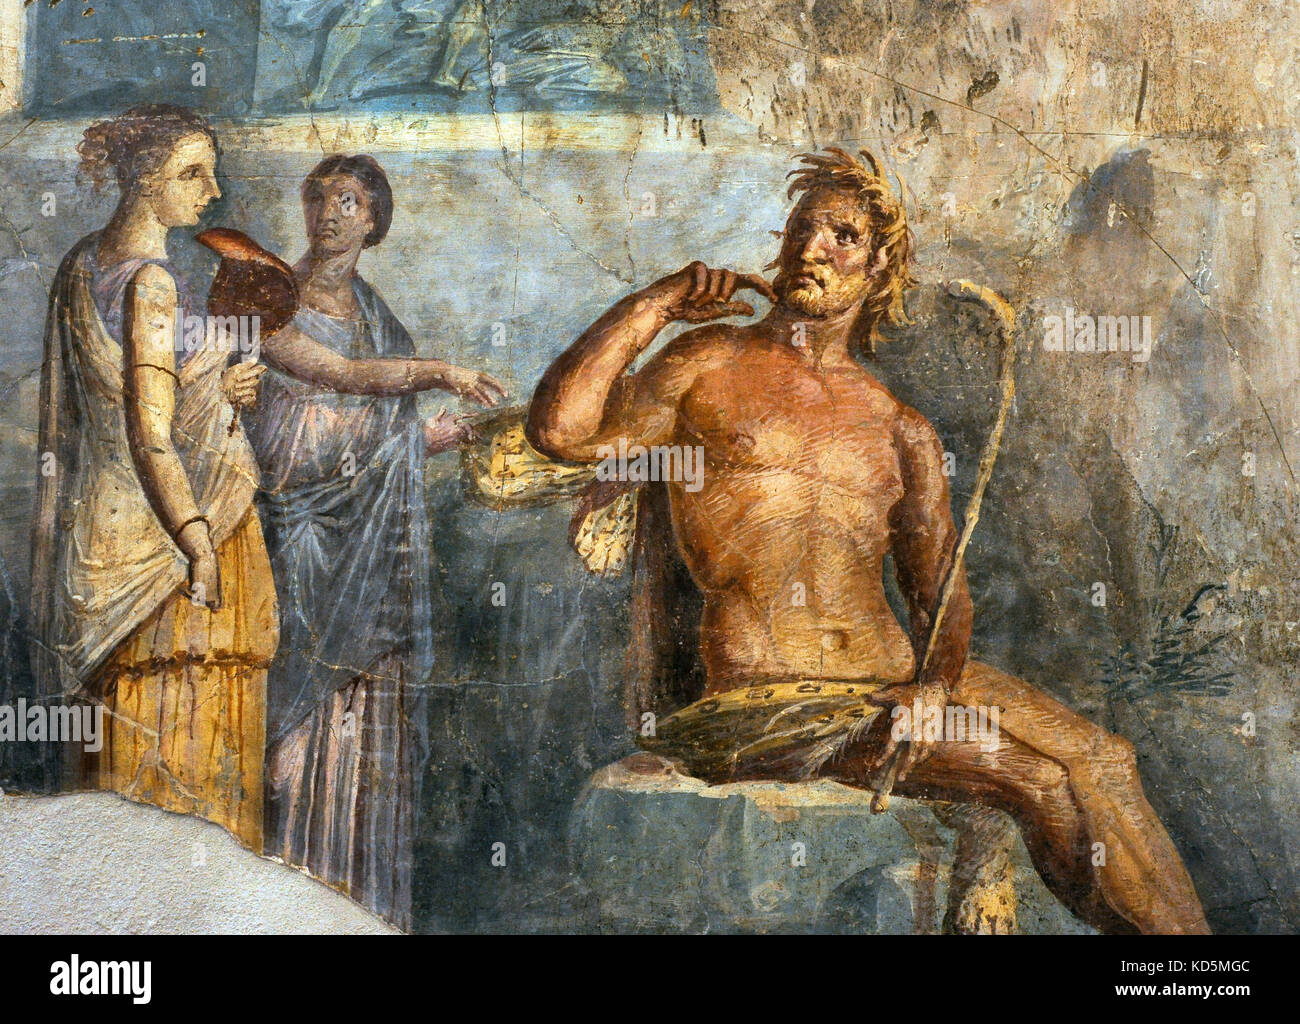 Galatea finds Polyphemus. Detail. Roman fresco. Fourth Pompeian style (45-79). From Portici, Italy. National Archaeological Museum. Naples. Italy. Stock Photo